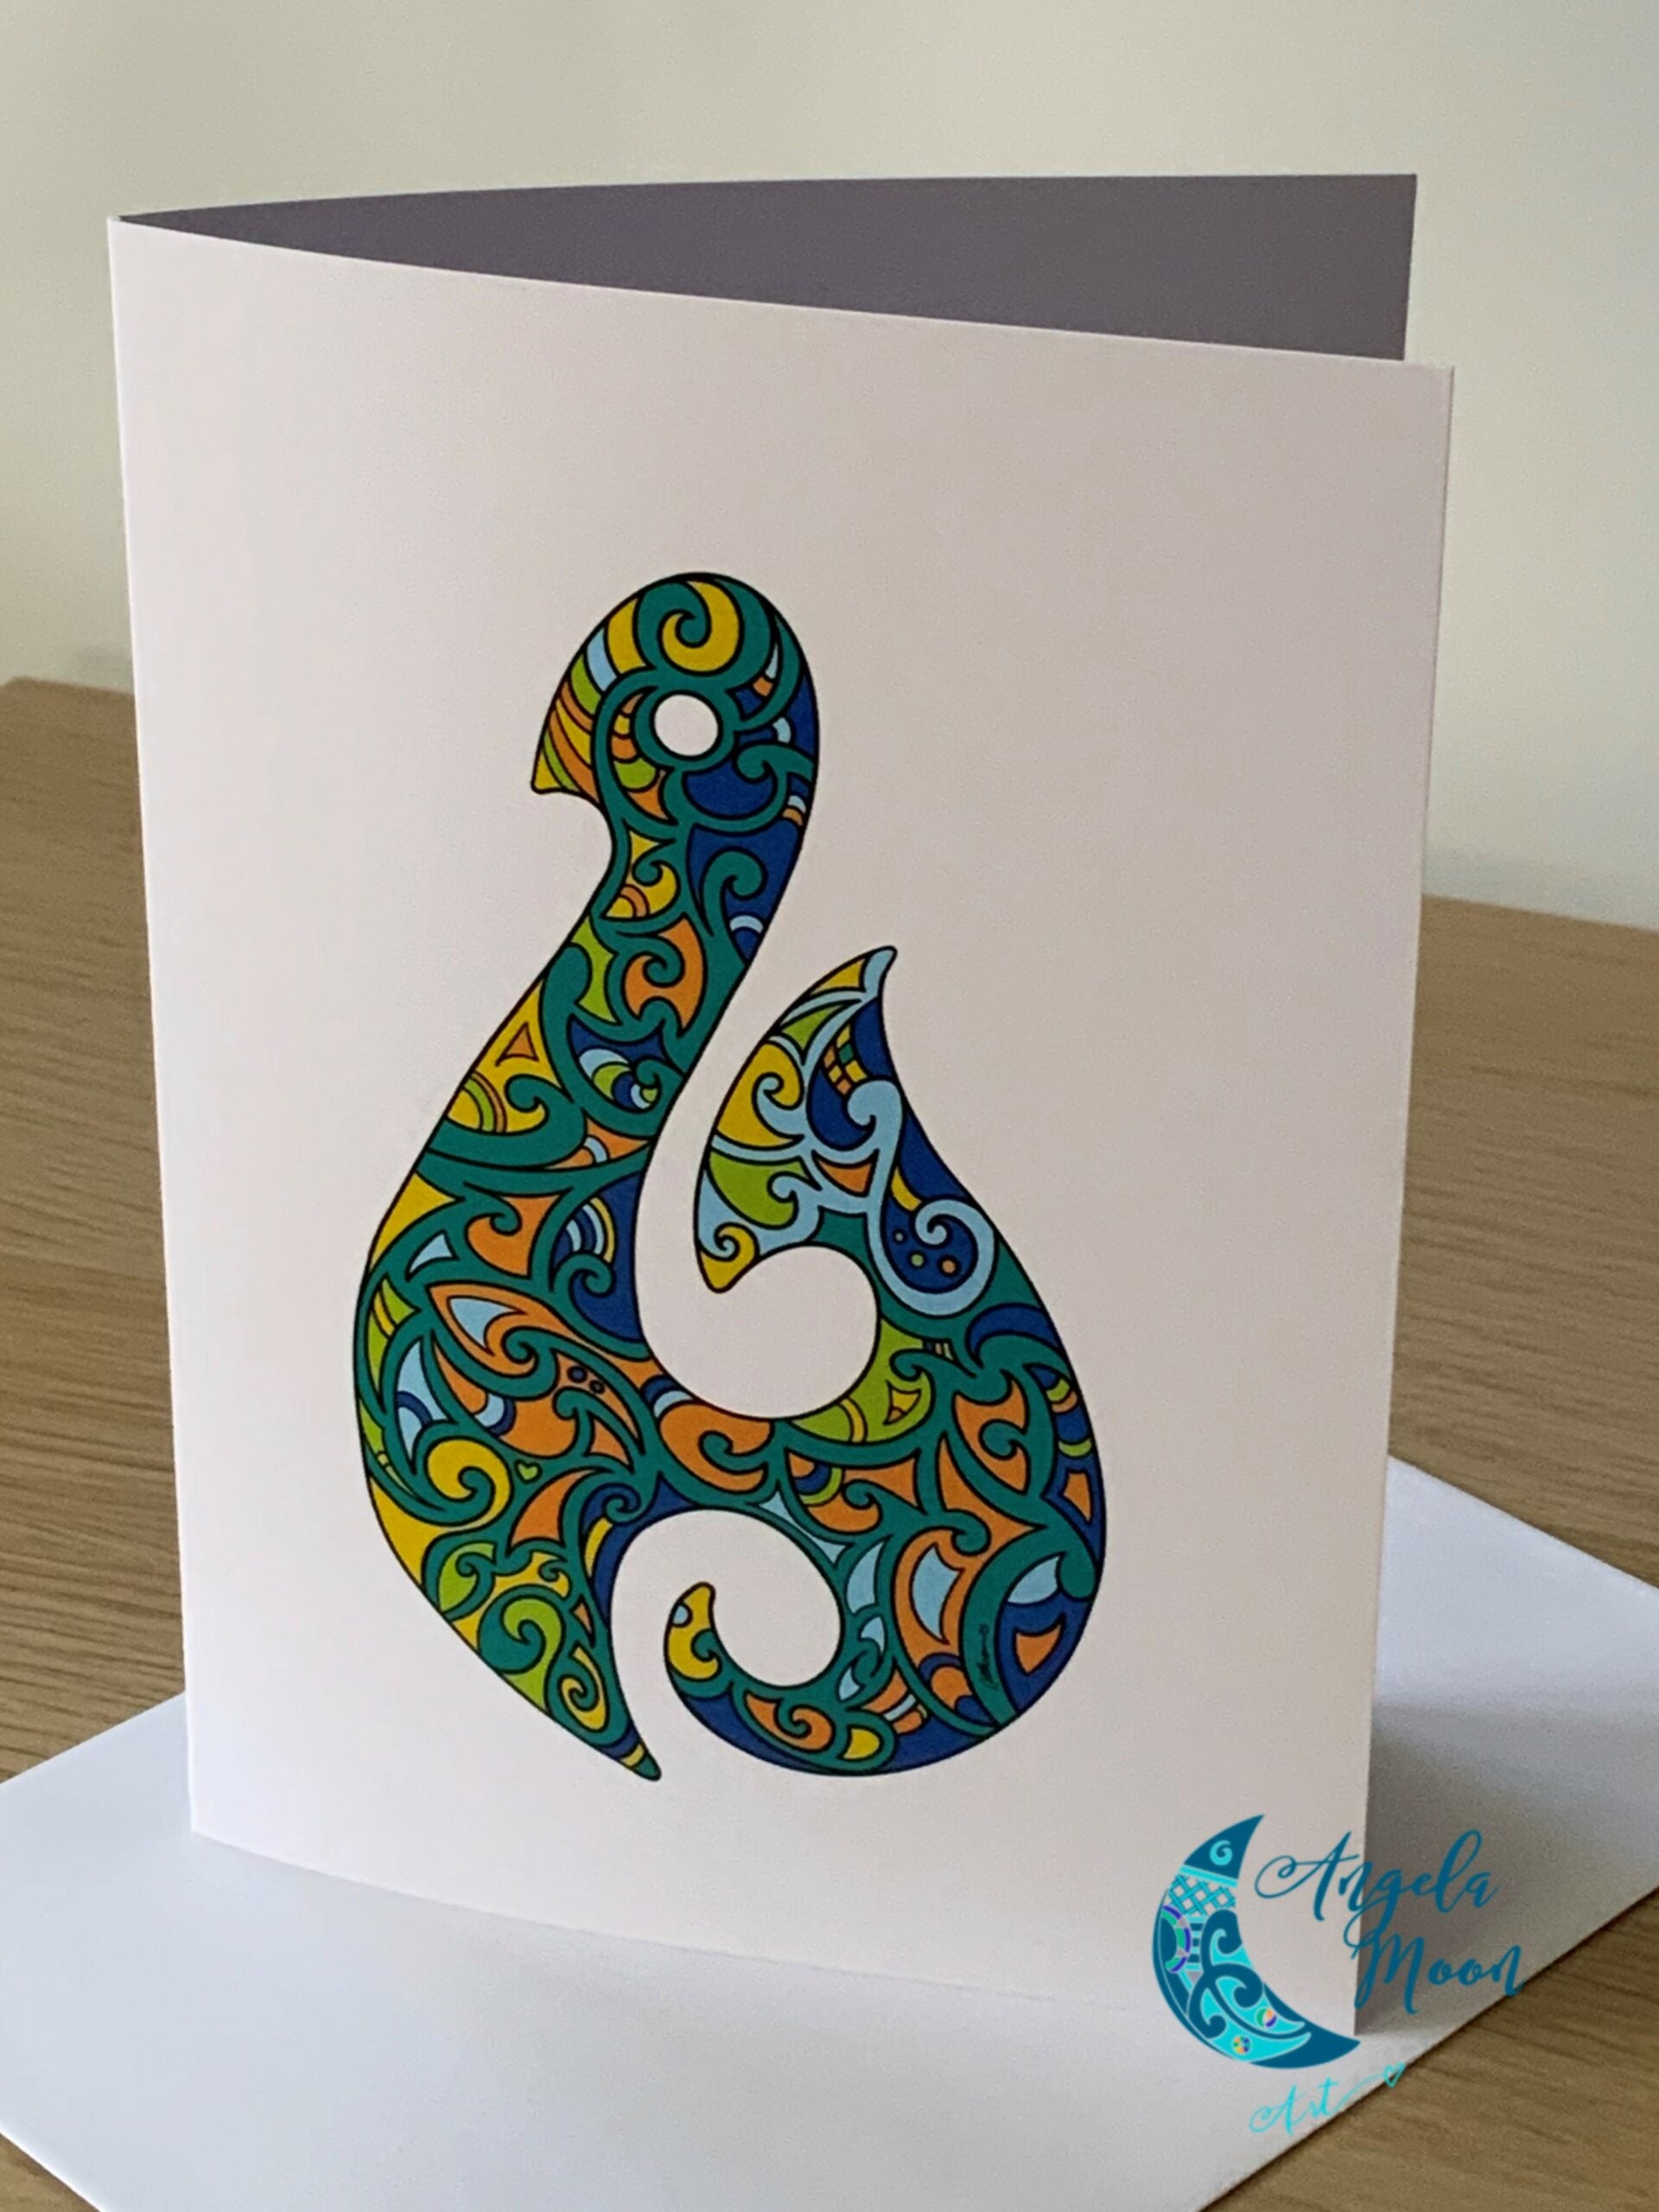 A Matau Card by Angela Moon Art presenting an intricate paisley cut-out design, part of a Multibuy offer, is standing on a table, accompanied by an envelope.